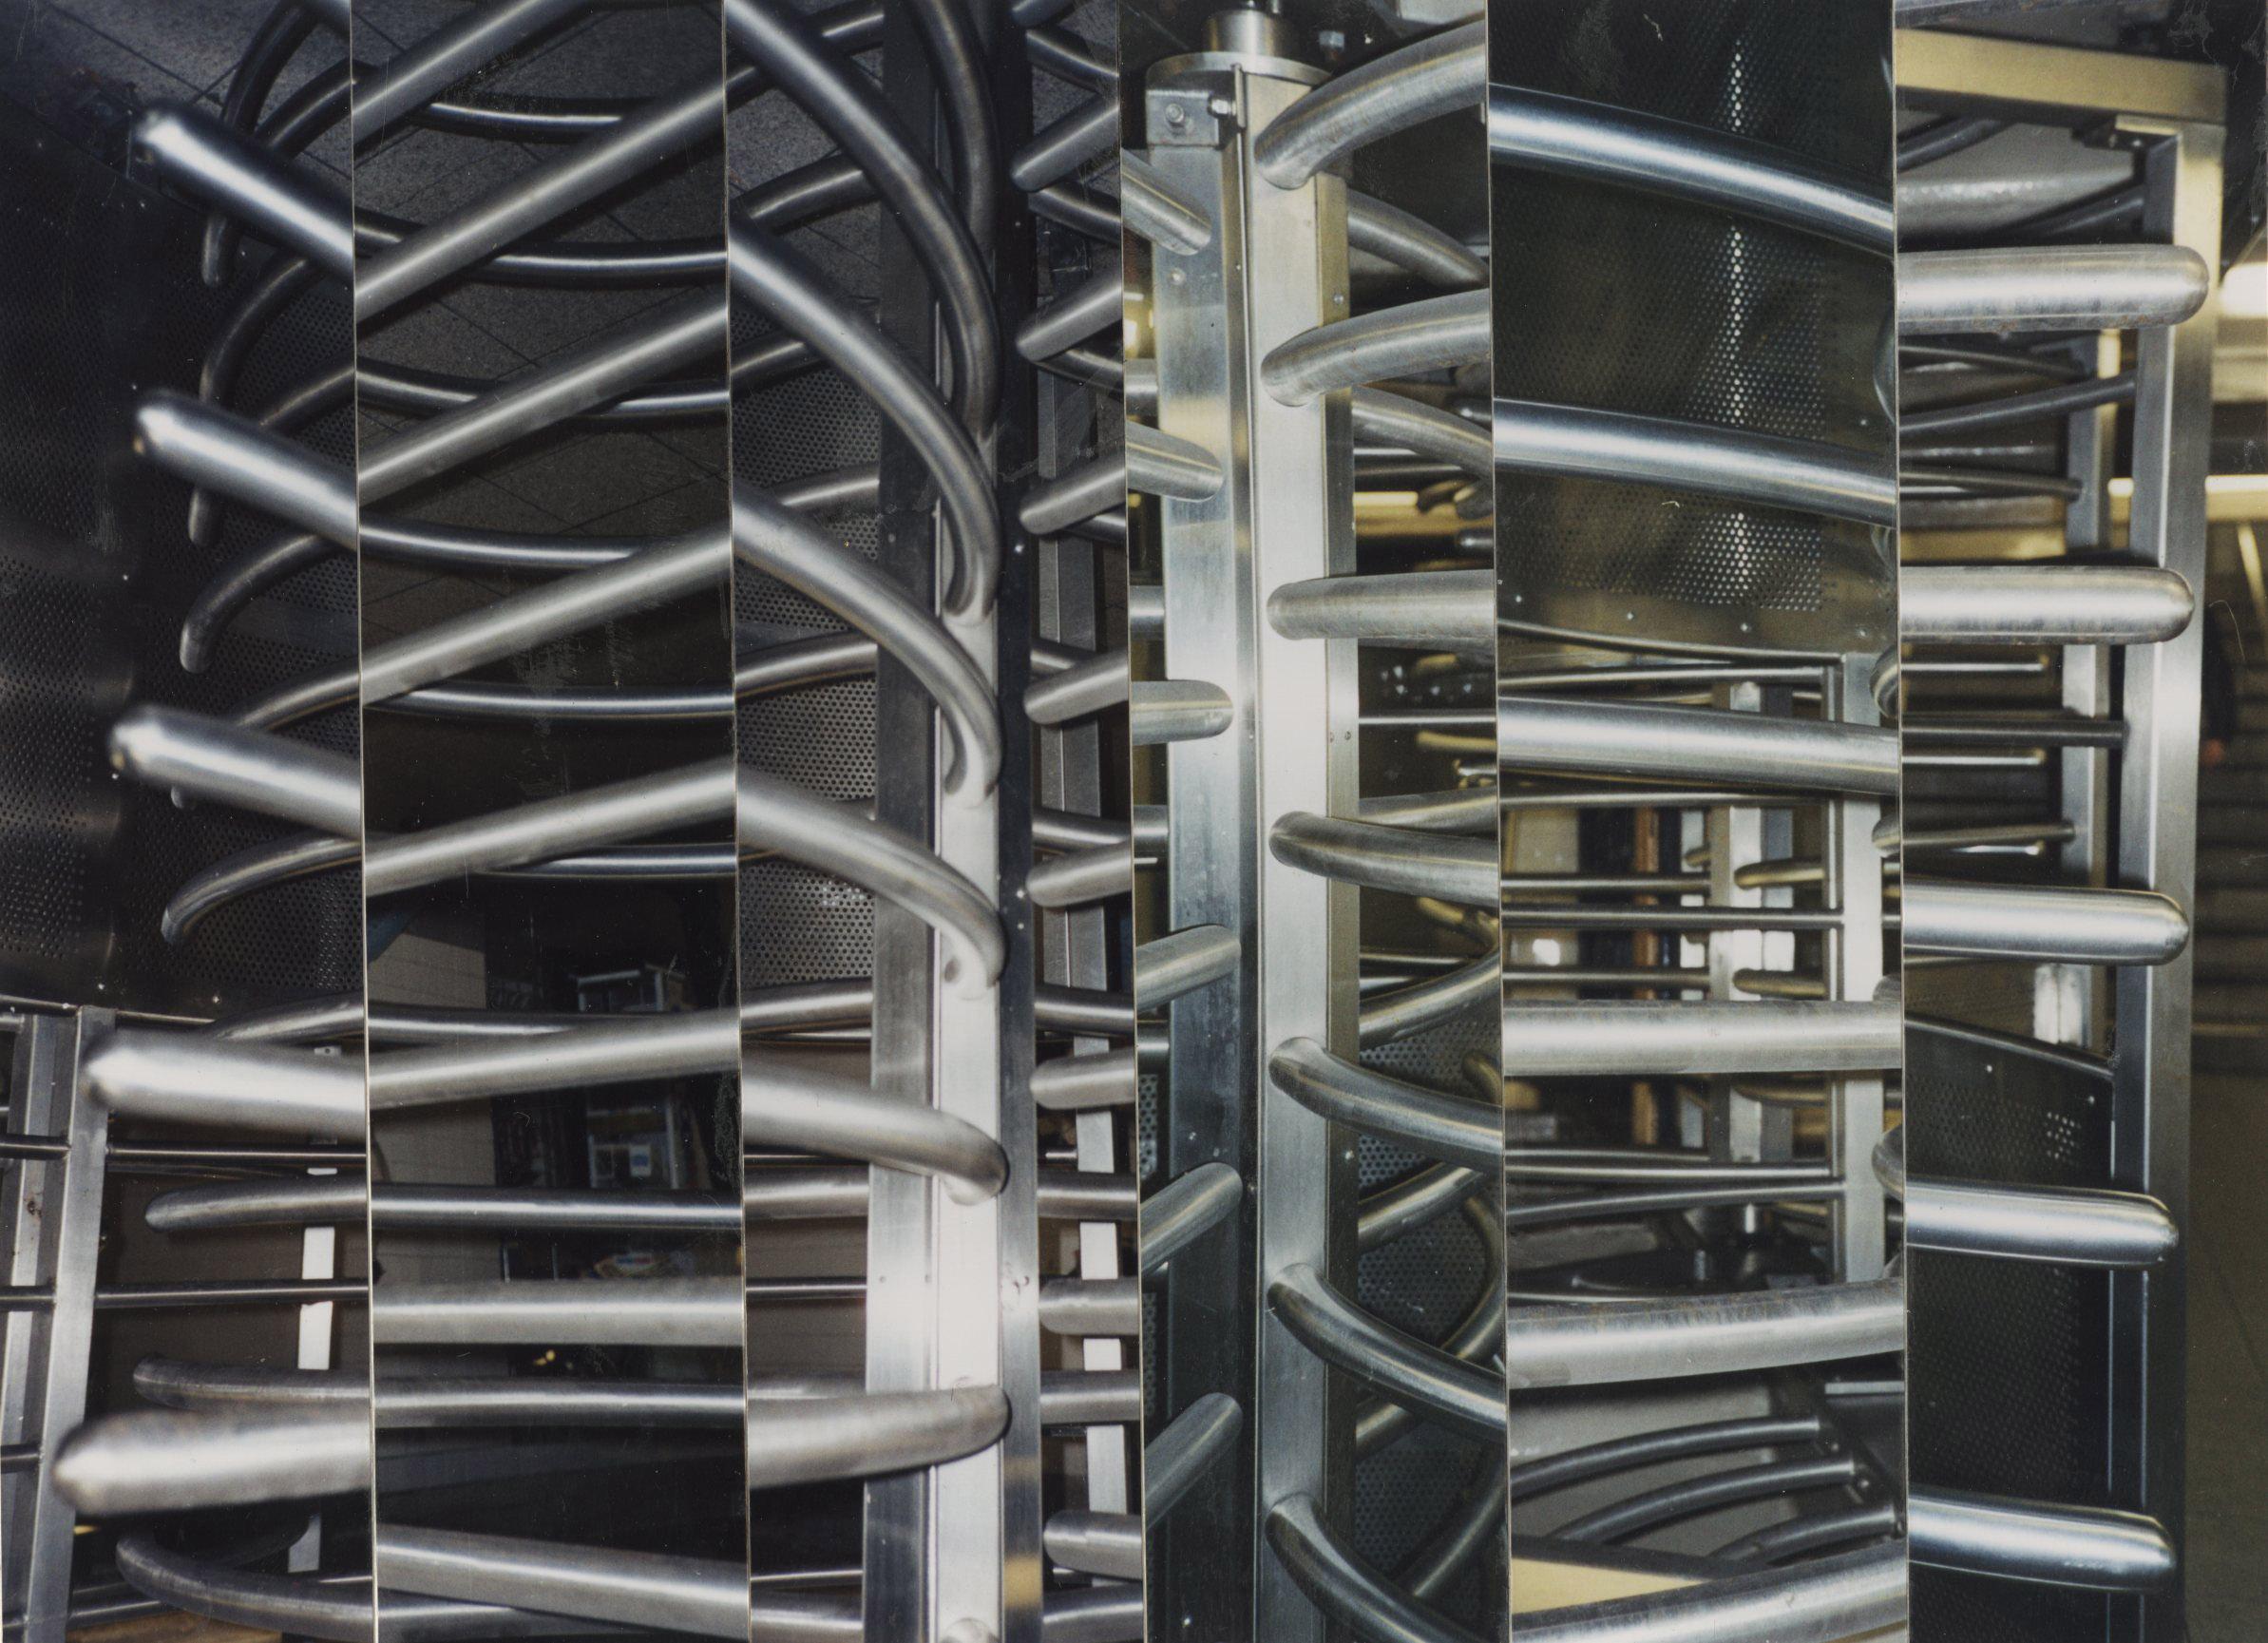 Peter Marks Abstract Photograph - Untitled (Subway Turnstiles)